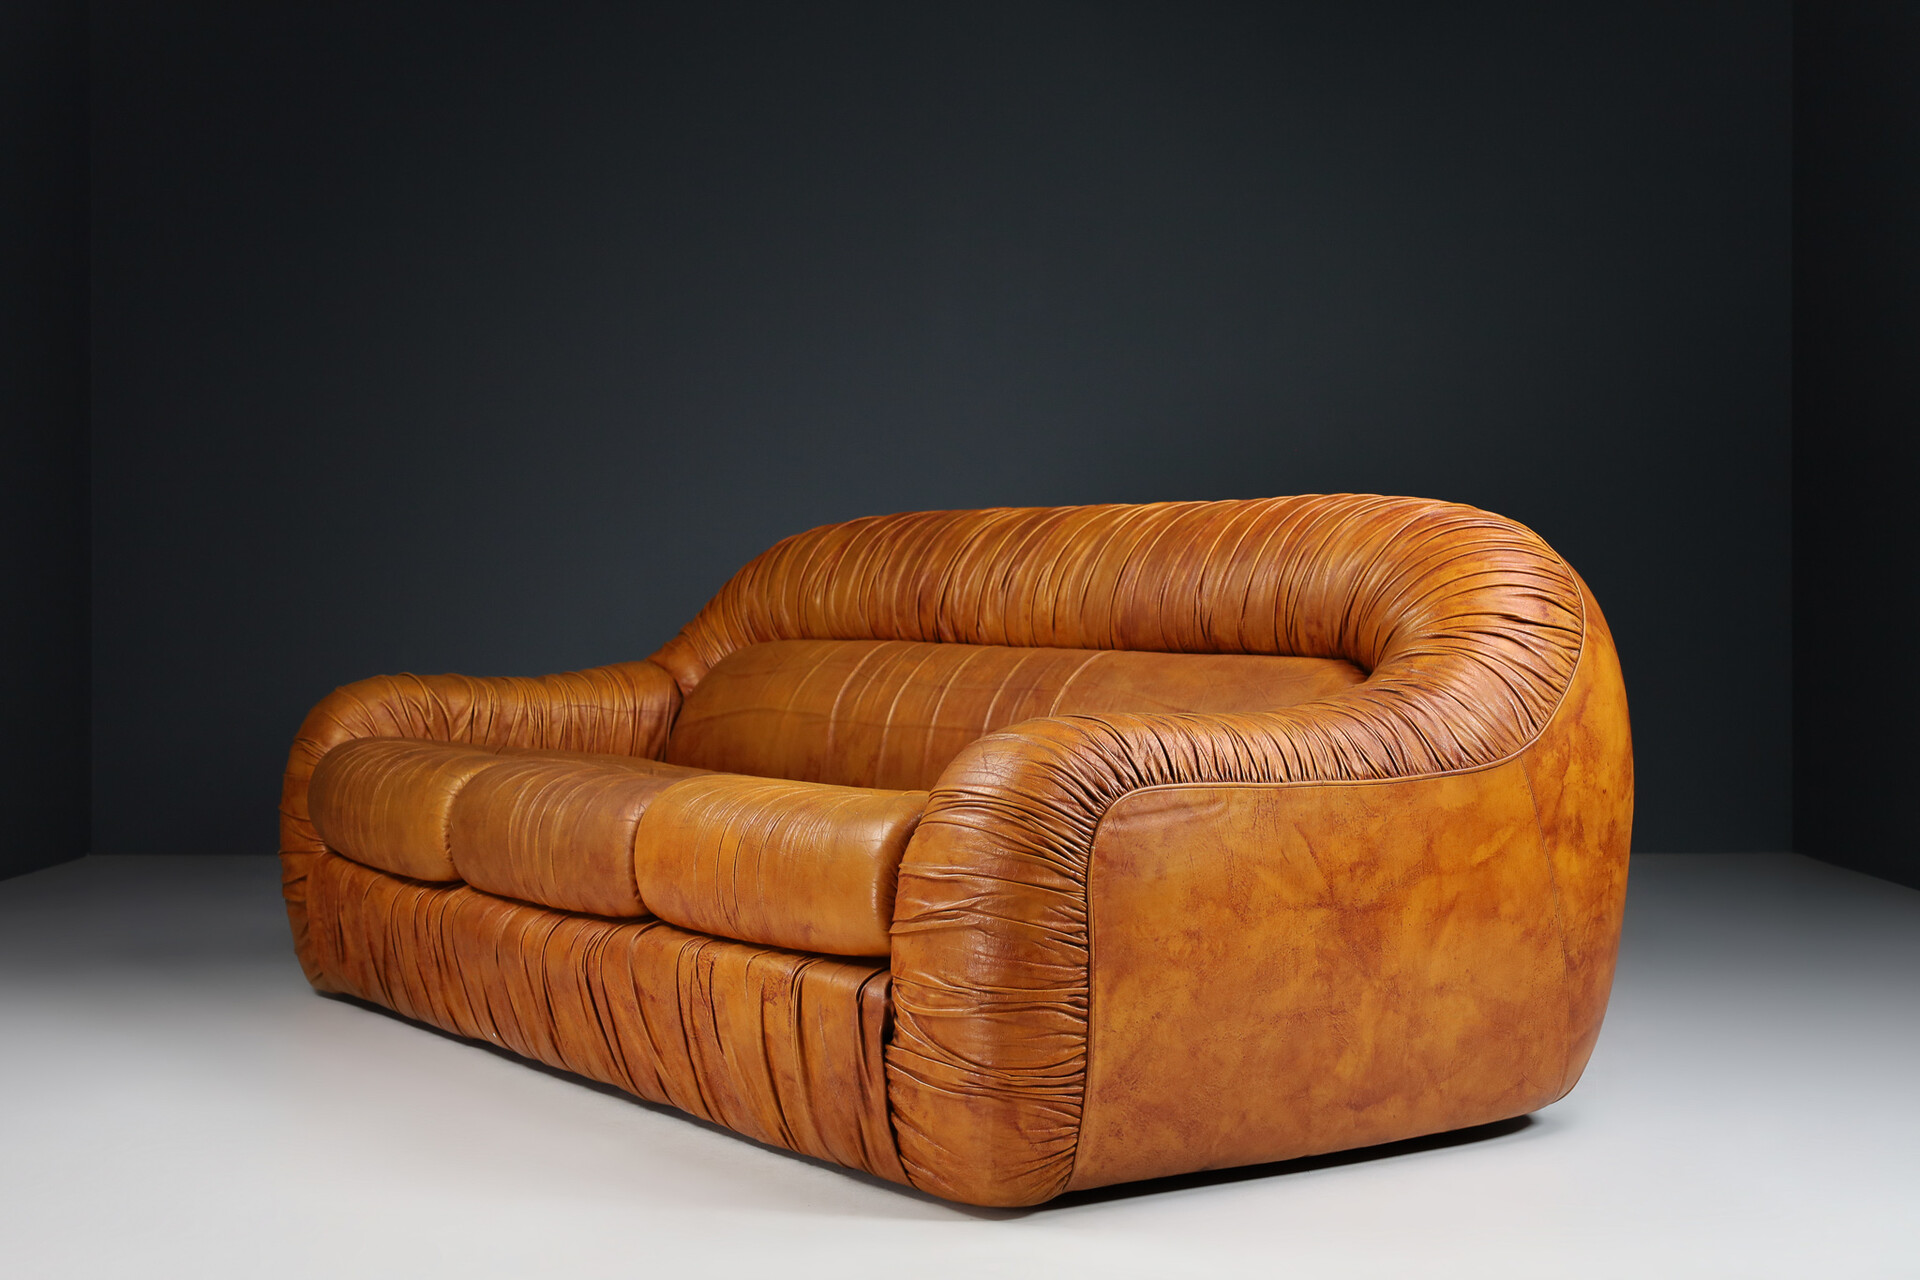 century - in Benches original Seating Mid century 1970s modern by Lounge for sofa - Eurosalotto, Italy - designed George Bighinello \'Capriccio\' leather, Sofas model Davidowski Late-20th and brown